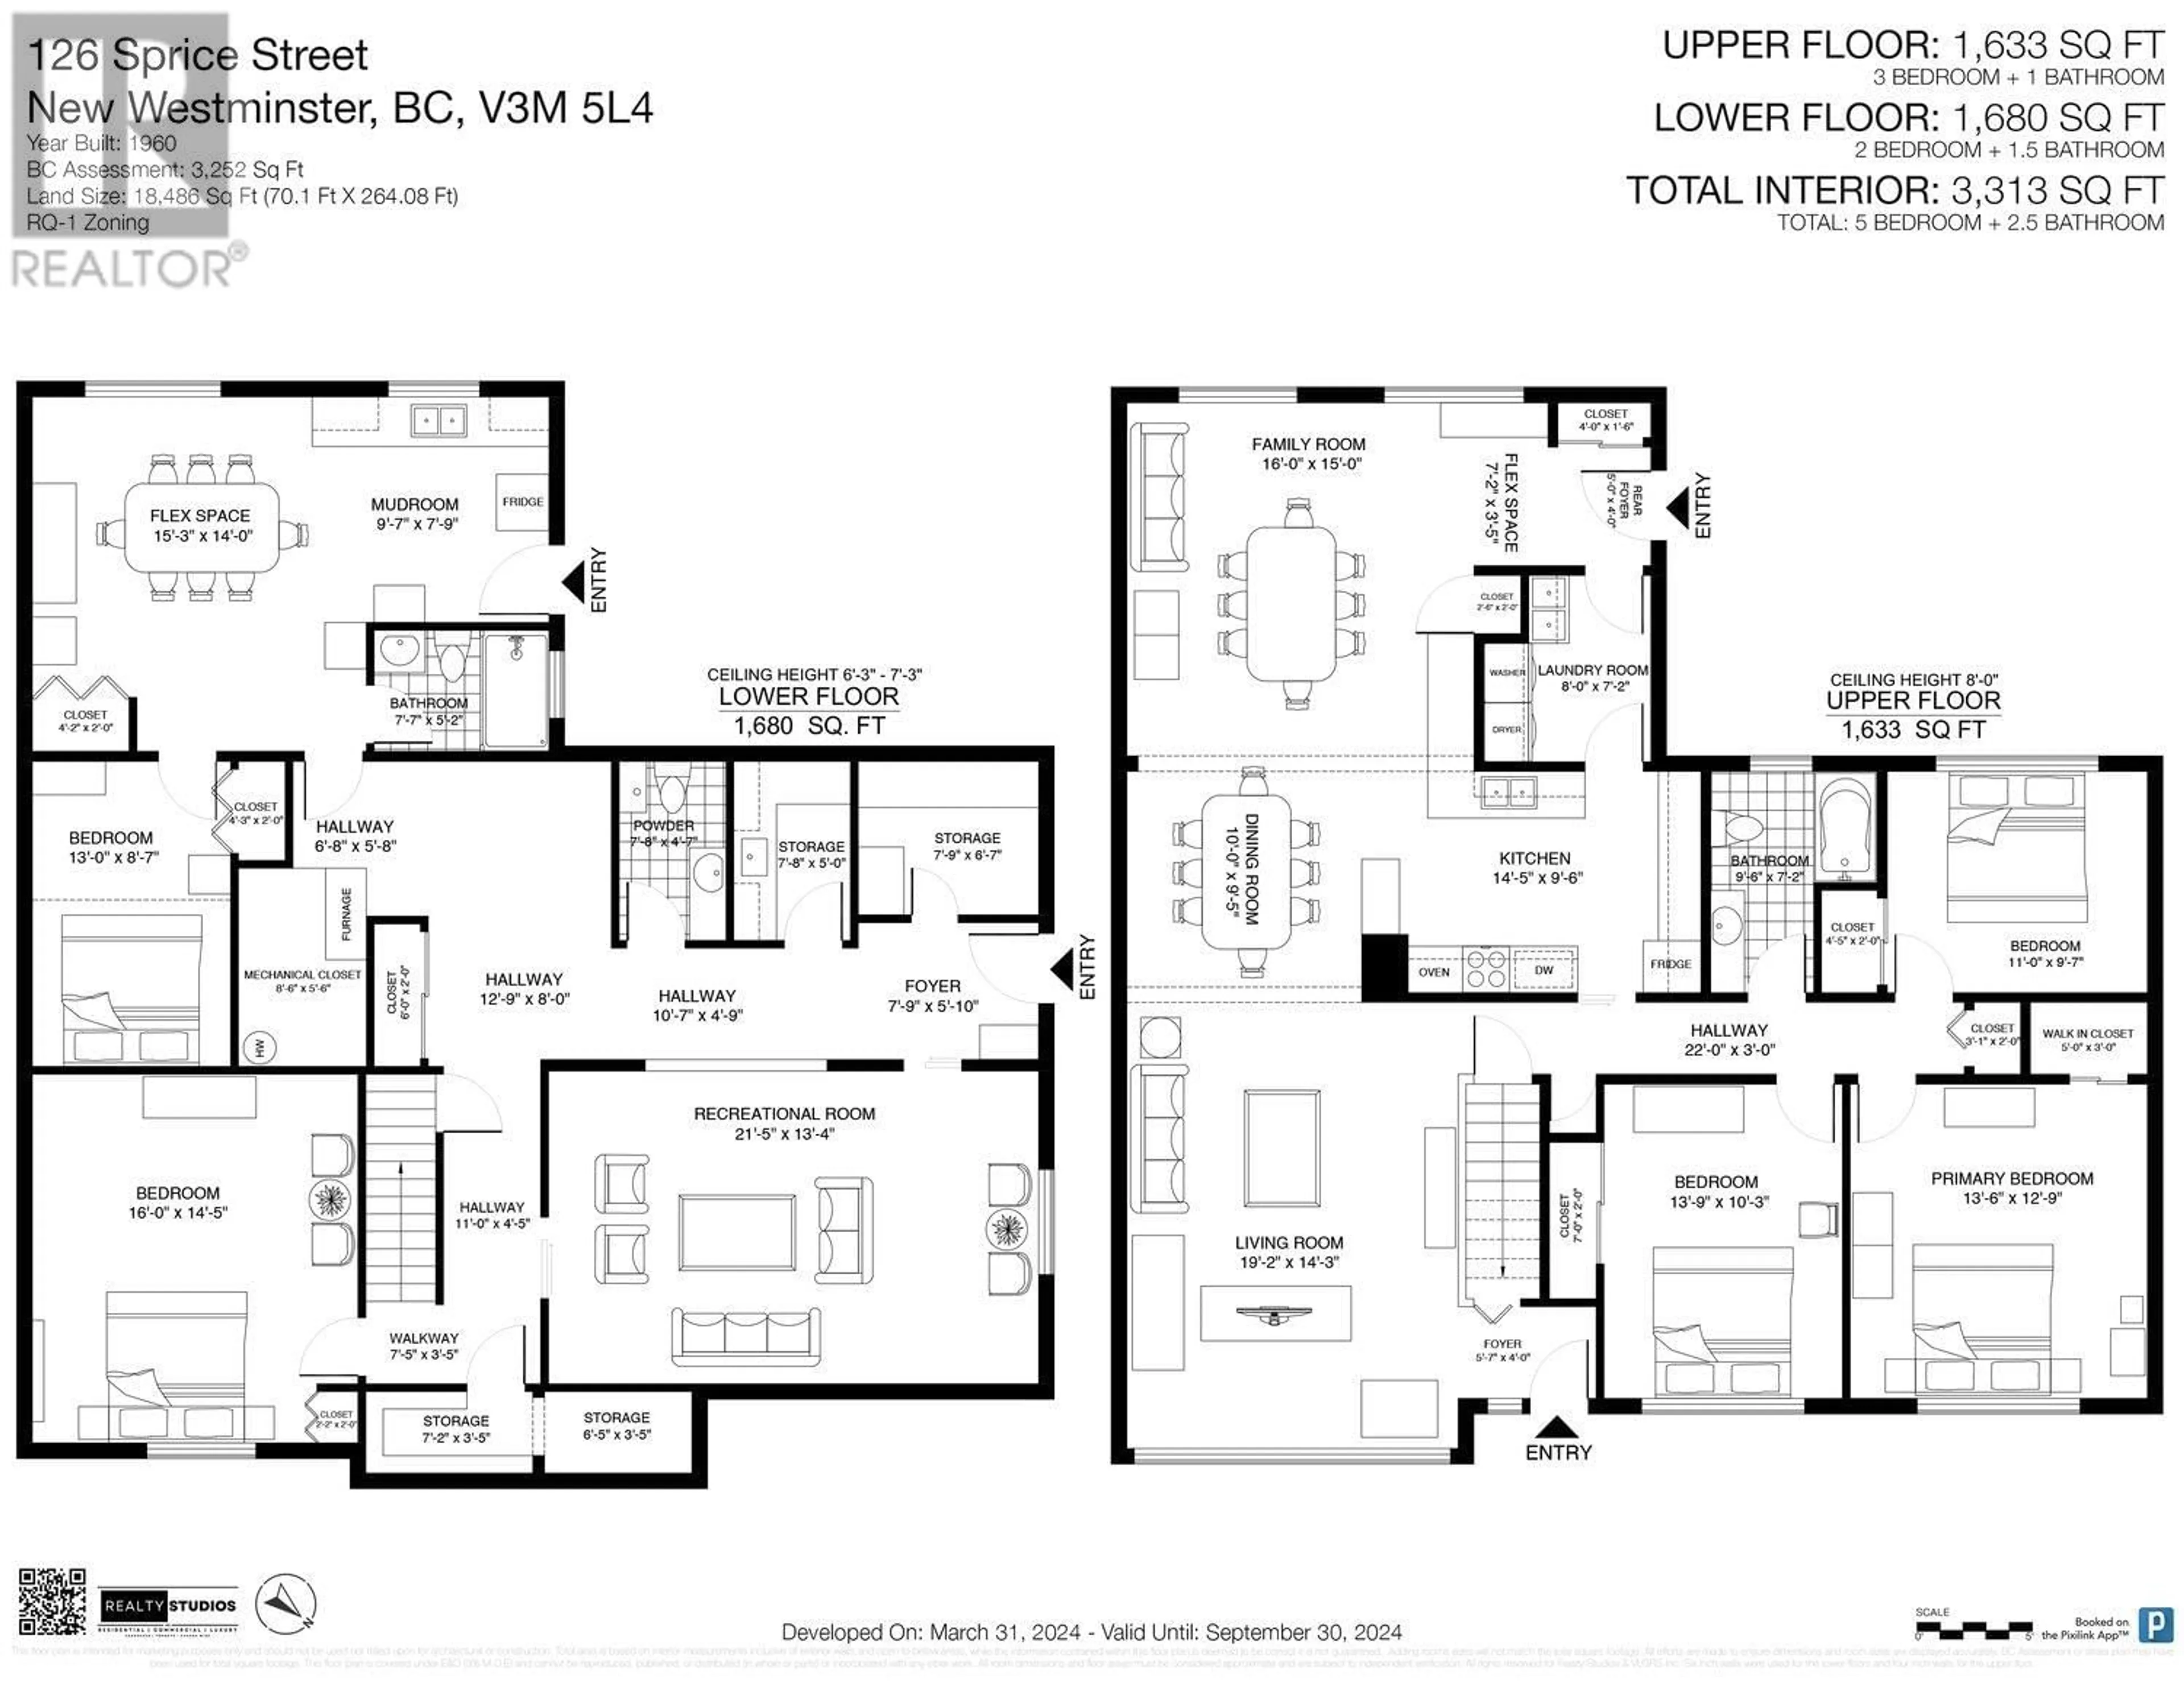 Floor plan for 126 SPRICE STREET, New Westminster British Columbia V3M5L4